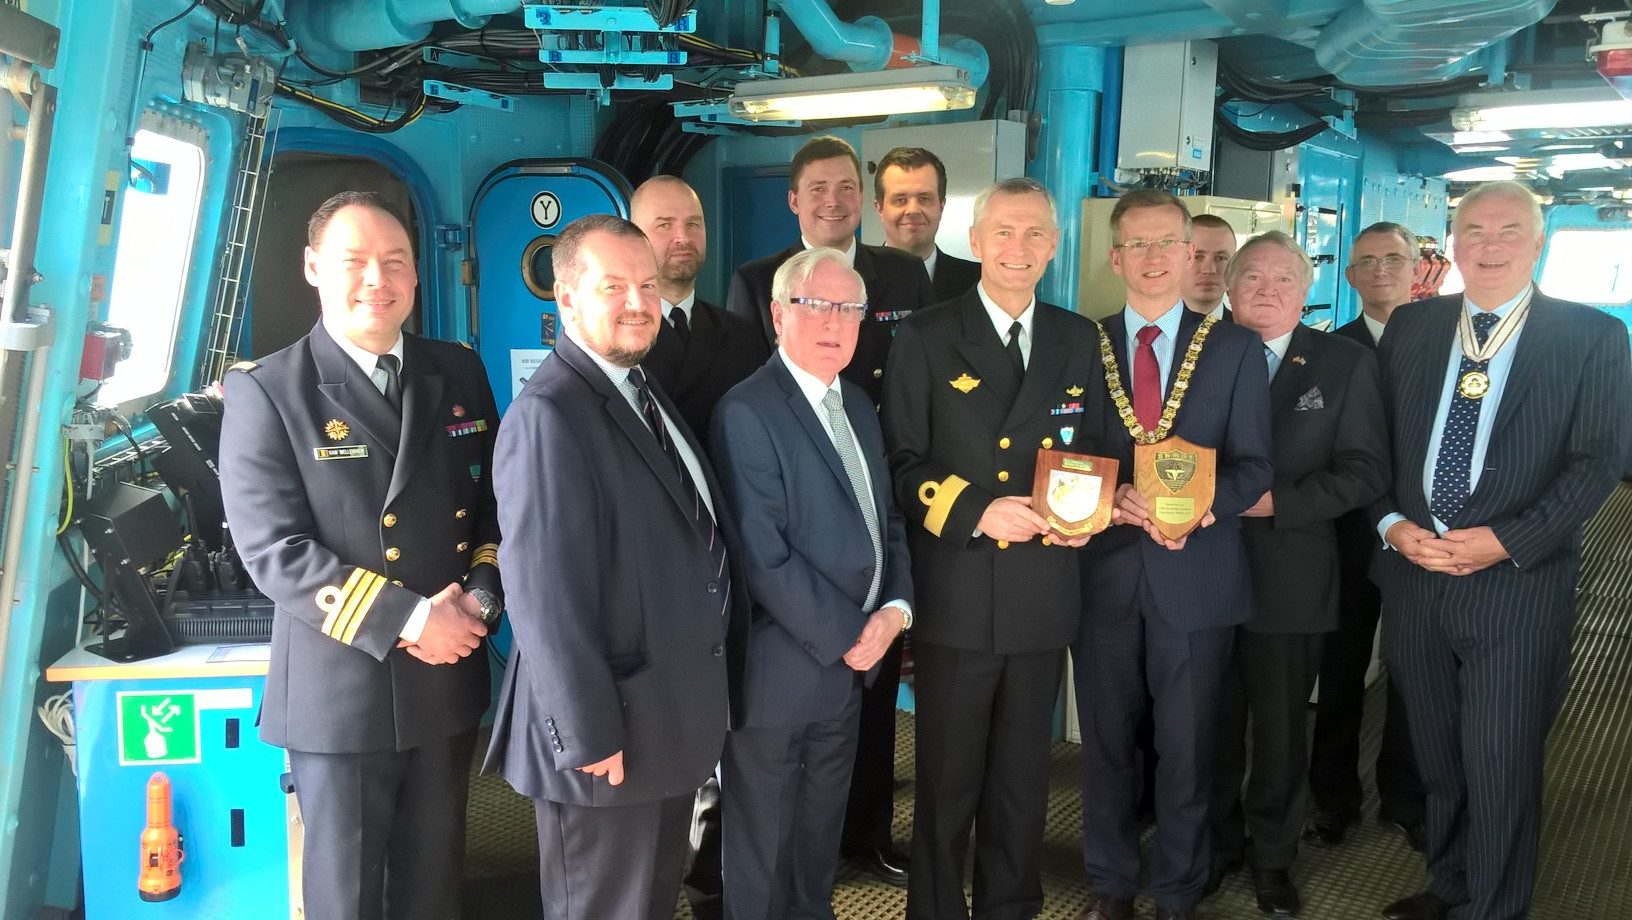 Visit of .HNoMS Roald Amundsen to Belfast with Lord Mayor,fellow DL Alastair Adair and the Honorary Norwegian consul Michael Ewing also present was Commander John Gray RN Senior Naval Officer Northern Ireland the lunch was hosted by Commodore Ole Morten Sandquist,RNoM and his officers.